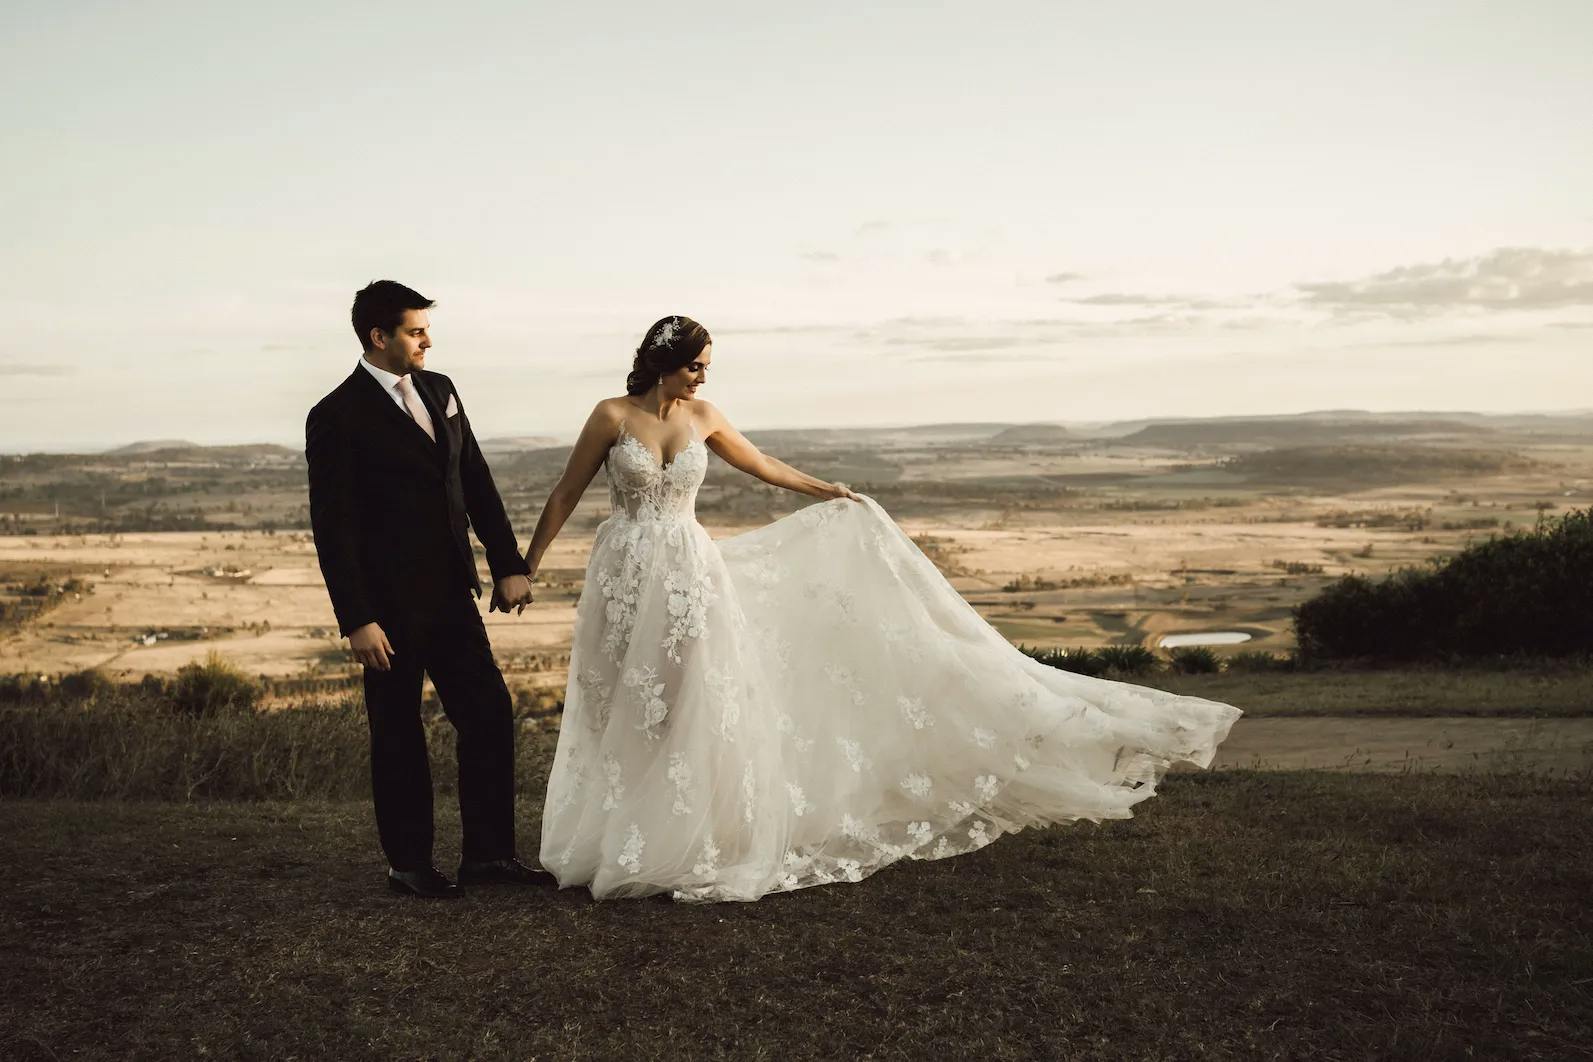 A bride and groom hold hands while standing on a hilltop overlooking a vast, scenic landscape at sunset. The bride wears a flowing white gown with intricate lace details, and the groom is dressed in a black suit and tie. The bride gently lifts her dress with her free hand.